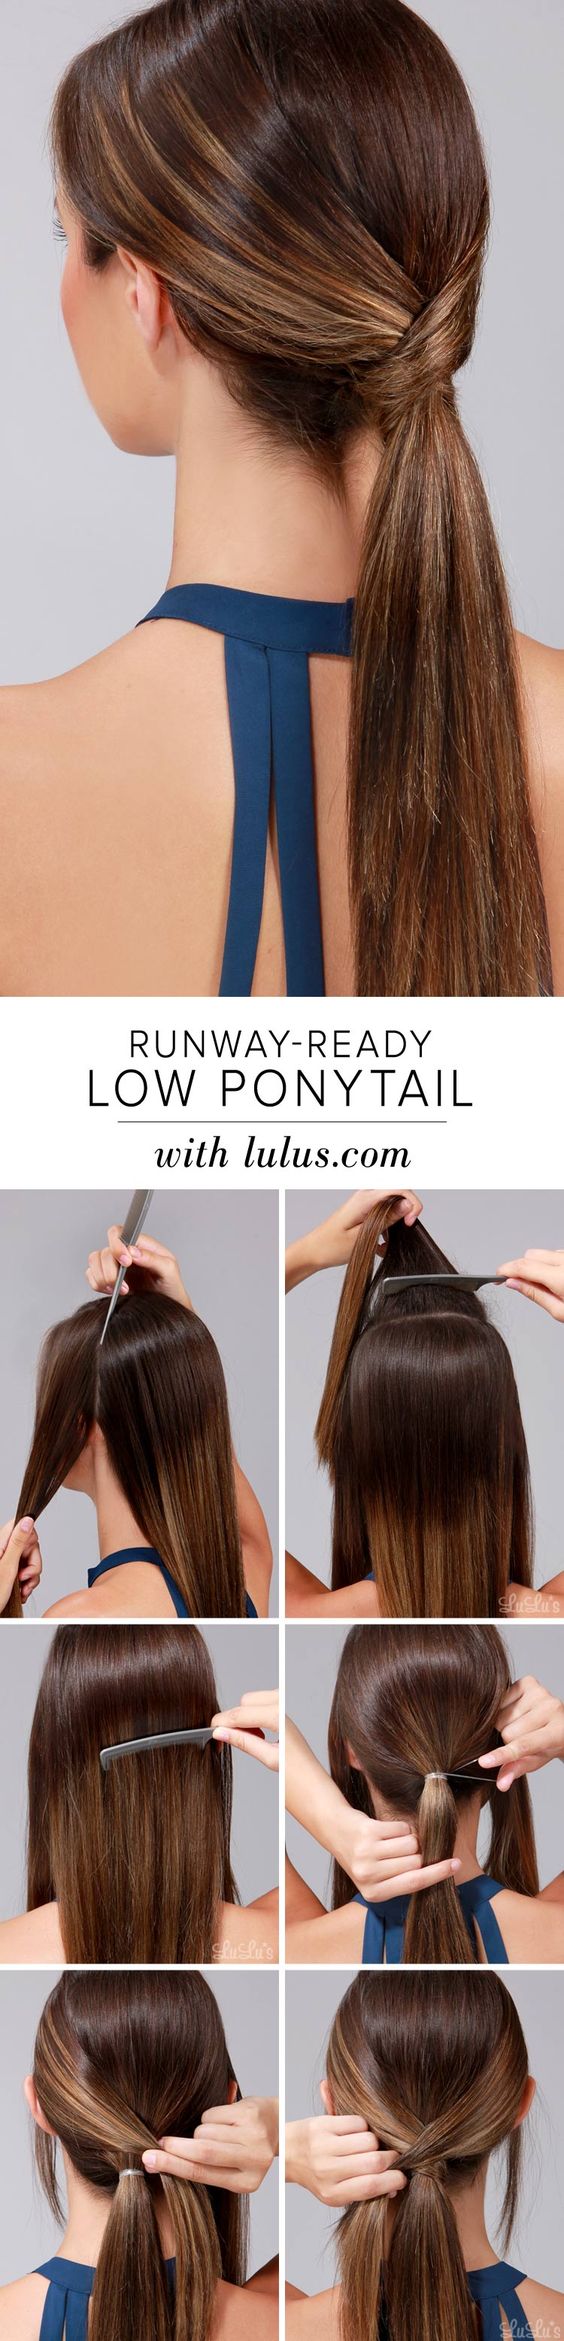 30 Simple Easy Ponytail Hairstyles for Lazy Girls ...